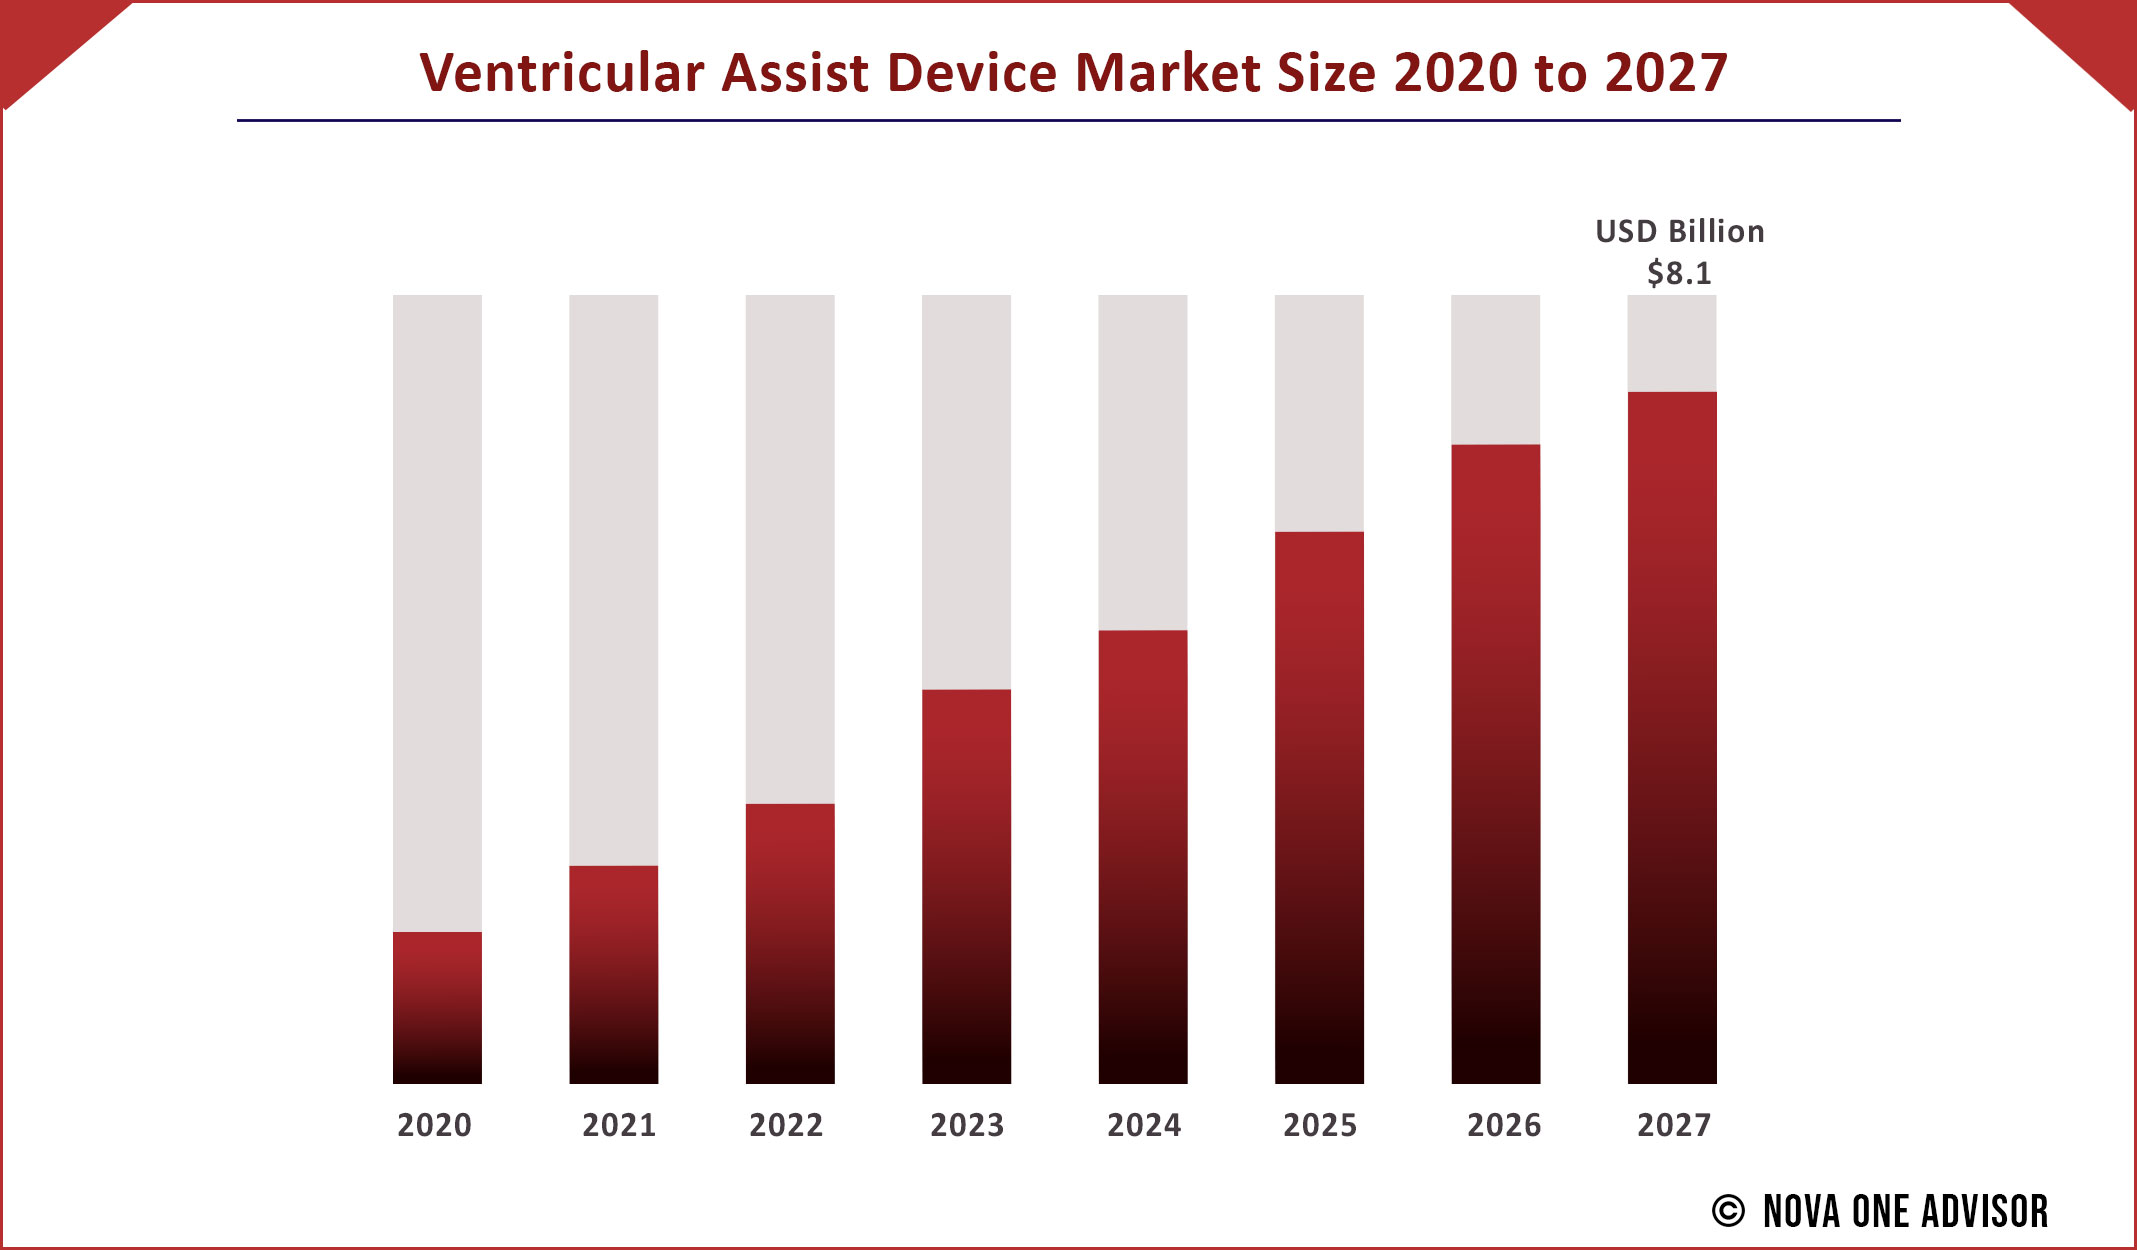 Ventricular Assist Device Market Size 2020 to 2027